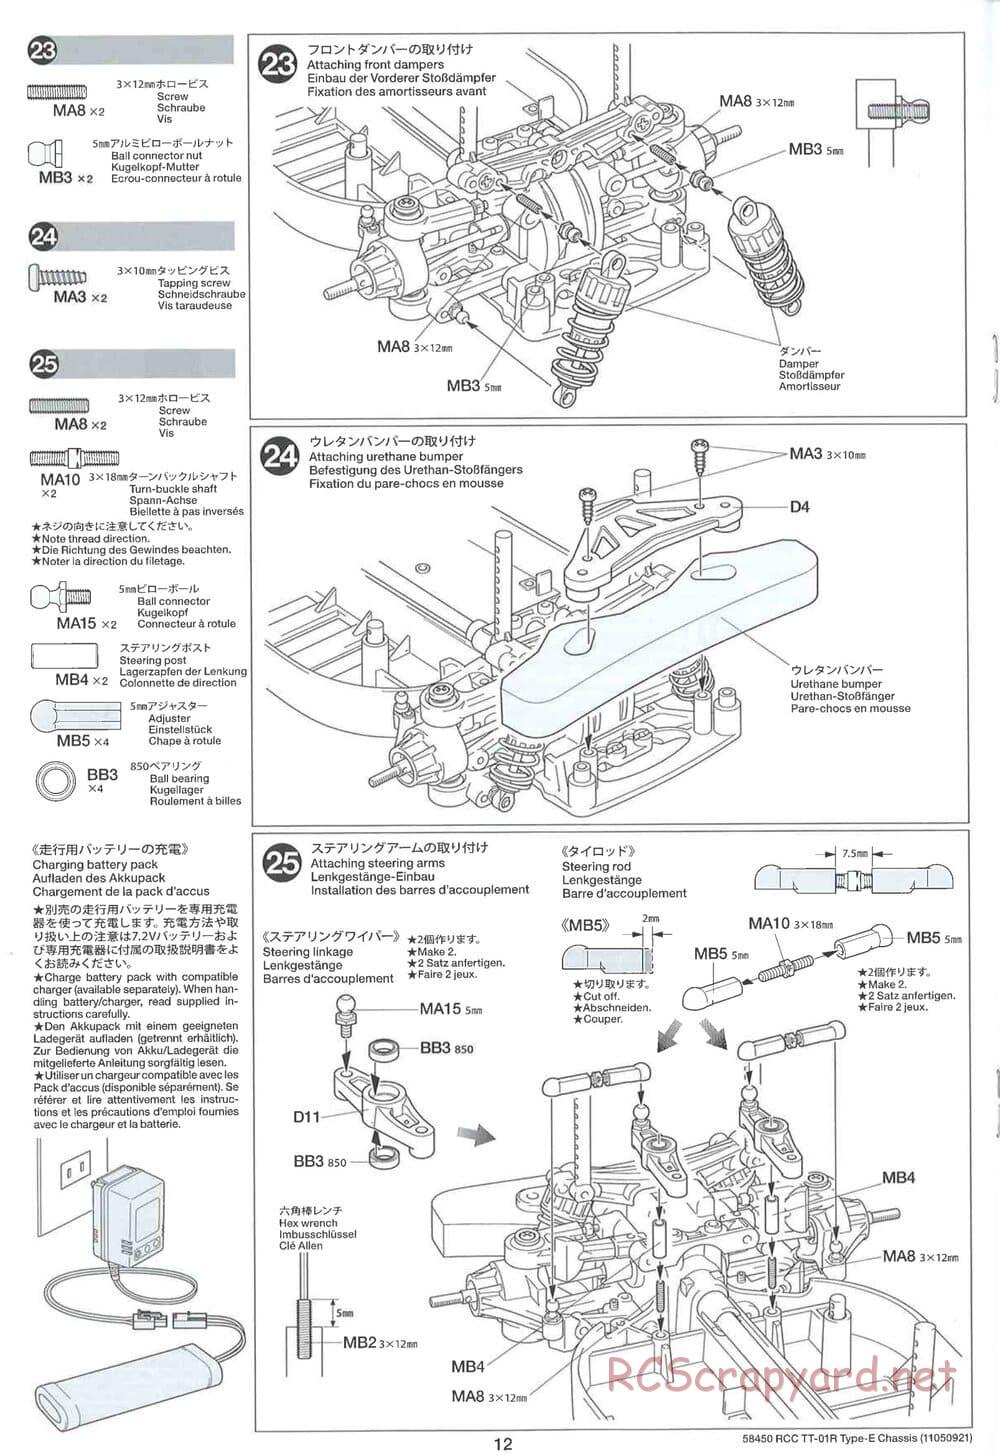 Tamiya - TT-01R Type-E Chassis - Manual - Page 12